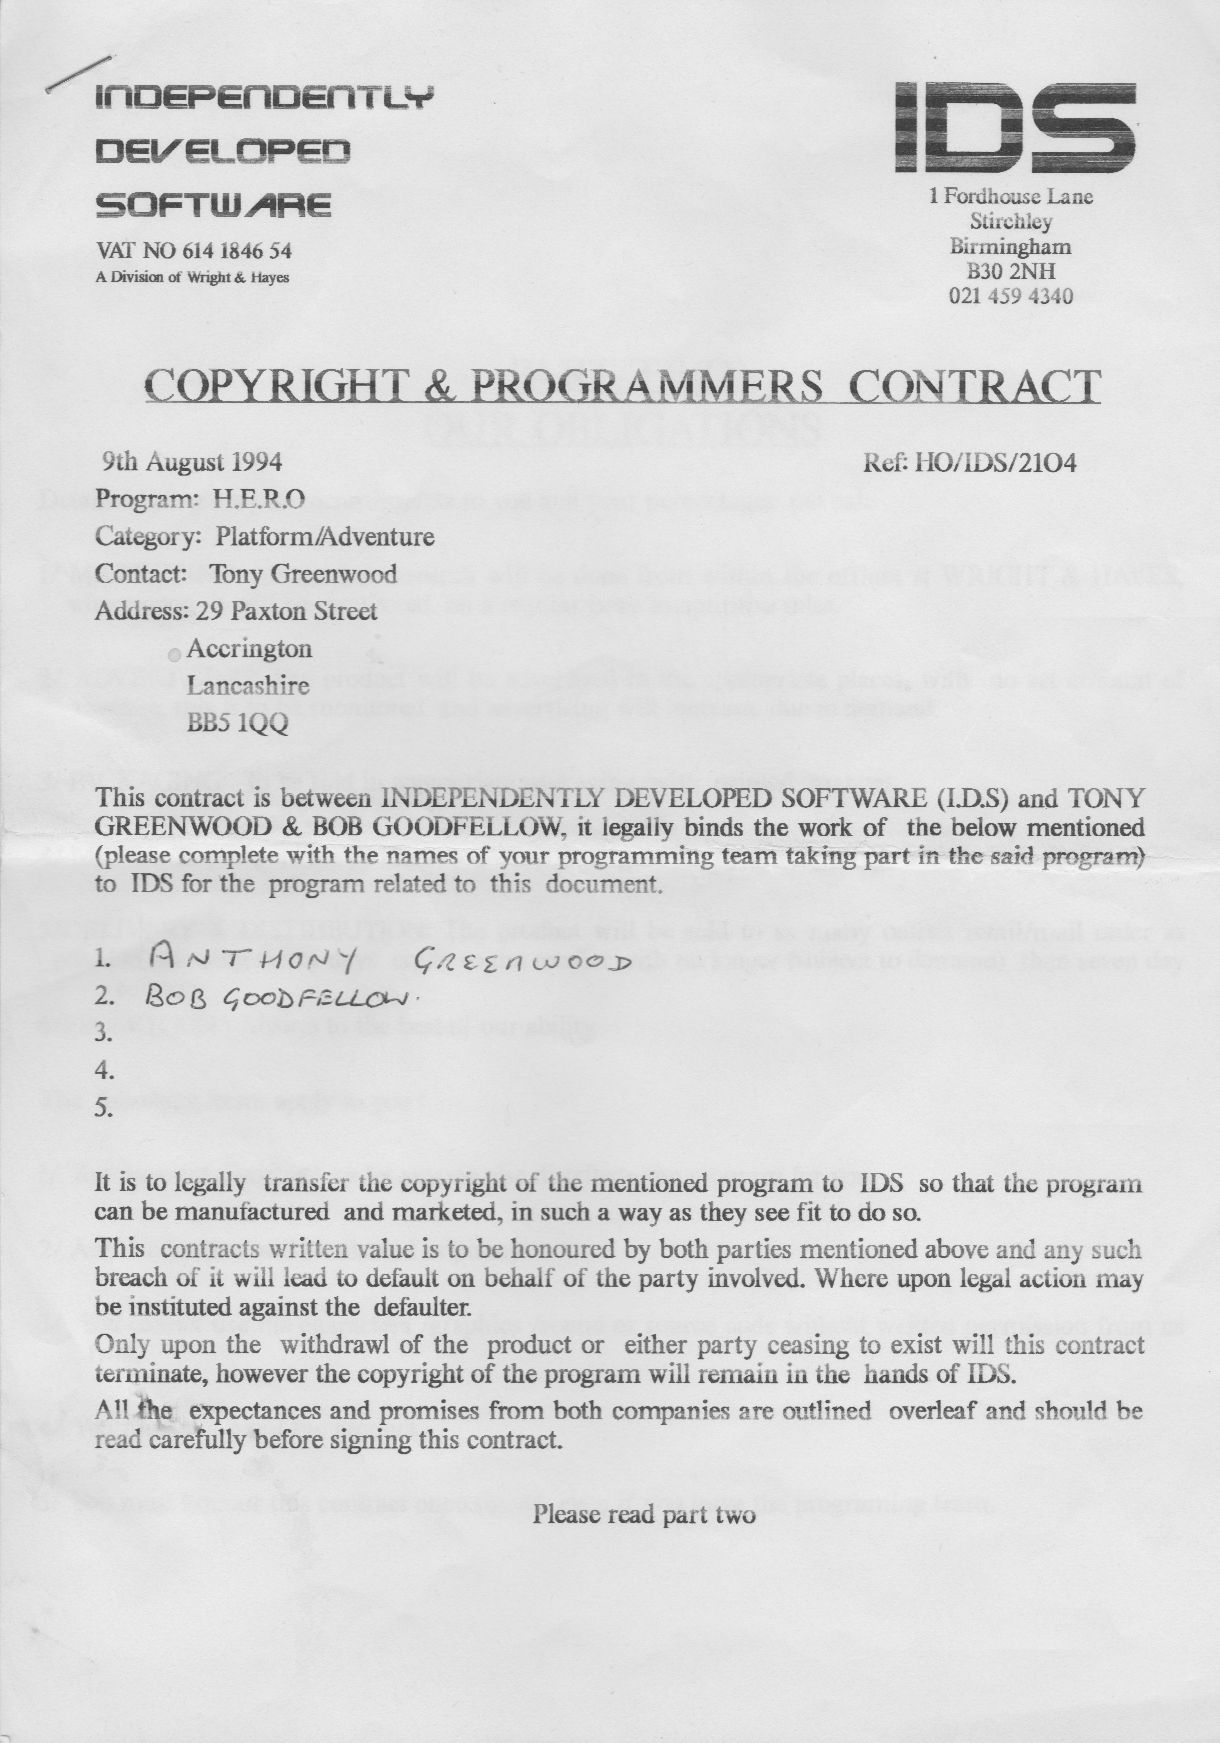 A page from the contract with IDS, the publisher that was supposed to release the game H.E.R.O.